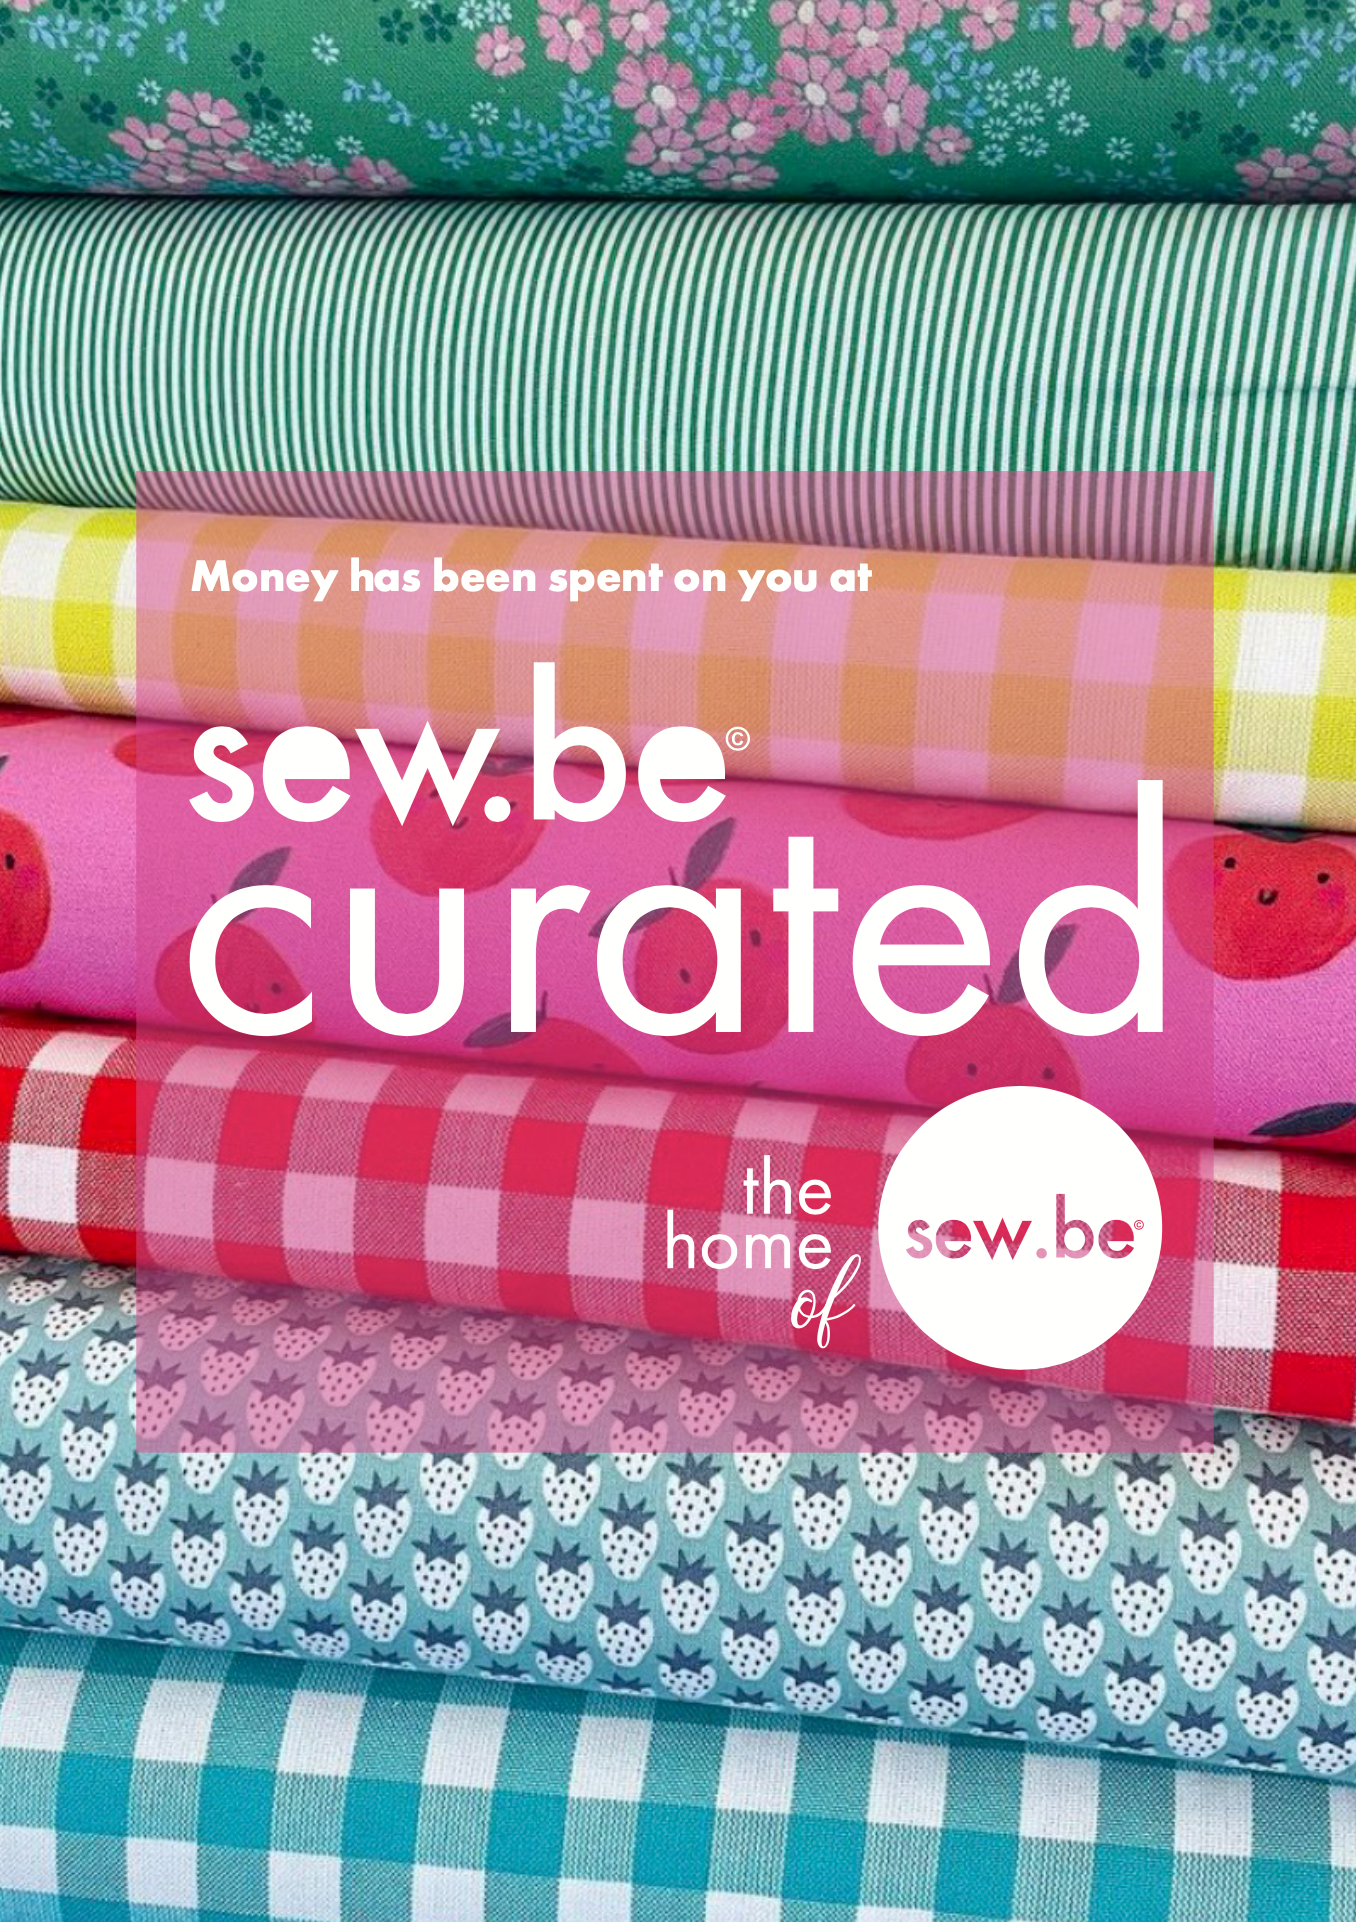 sew.be curated online gift card